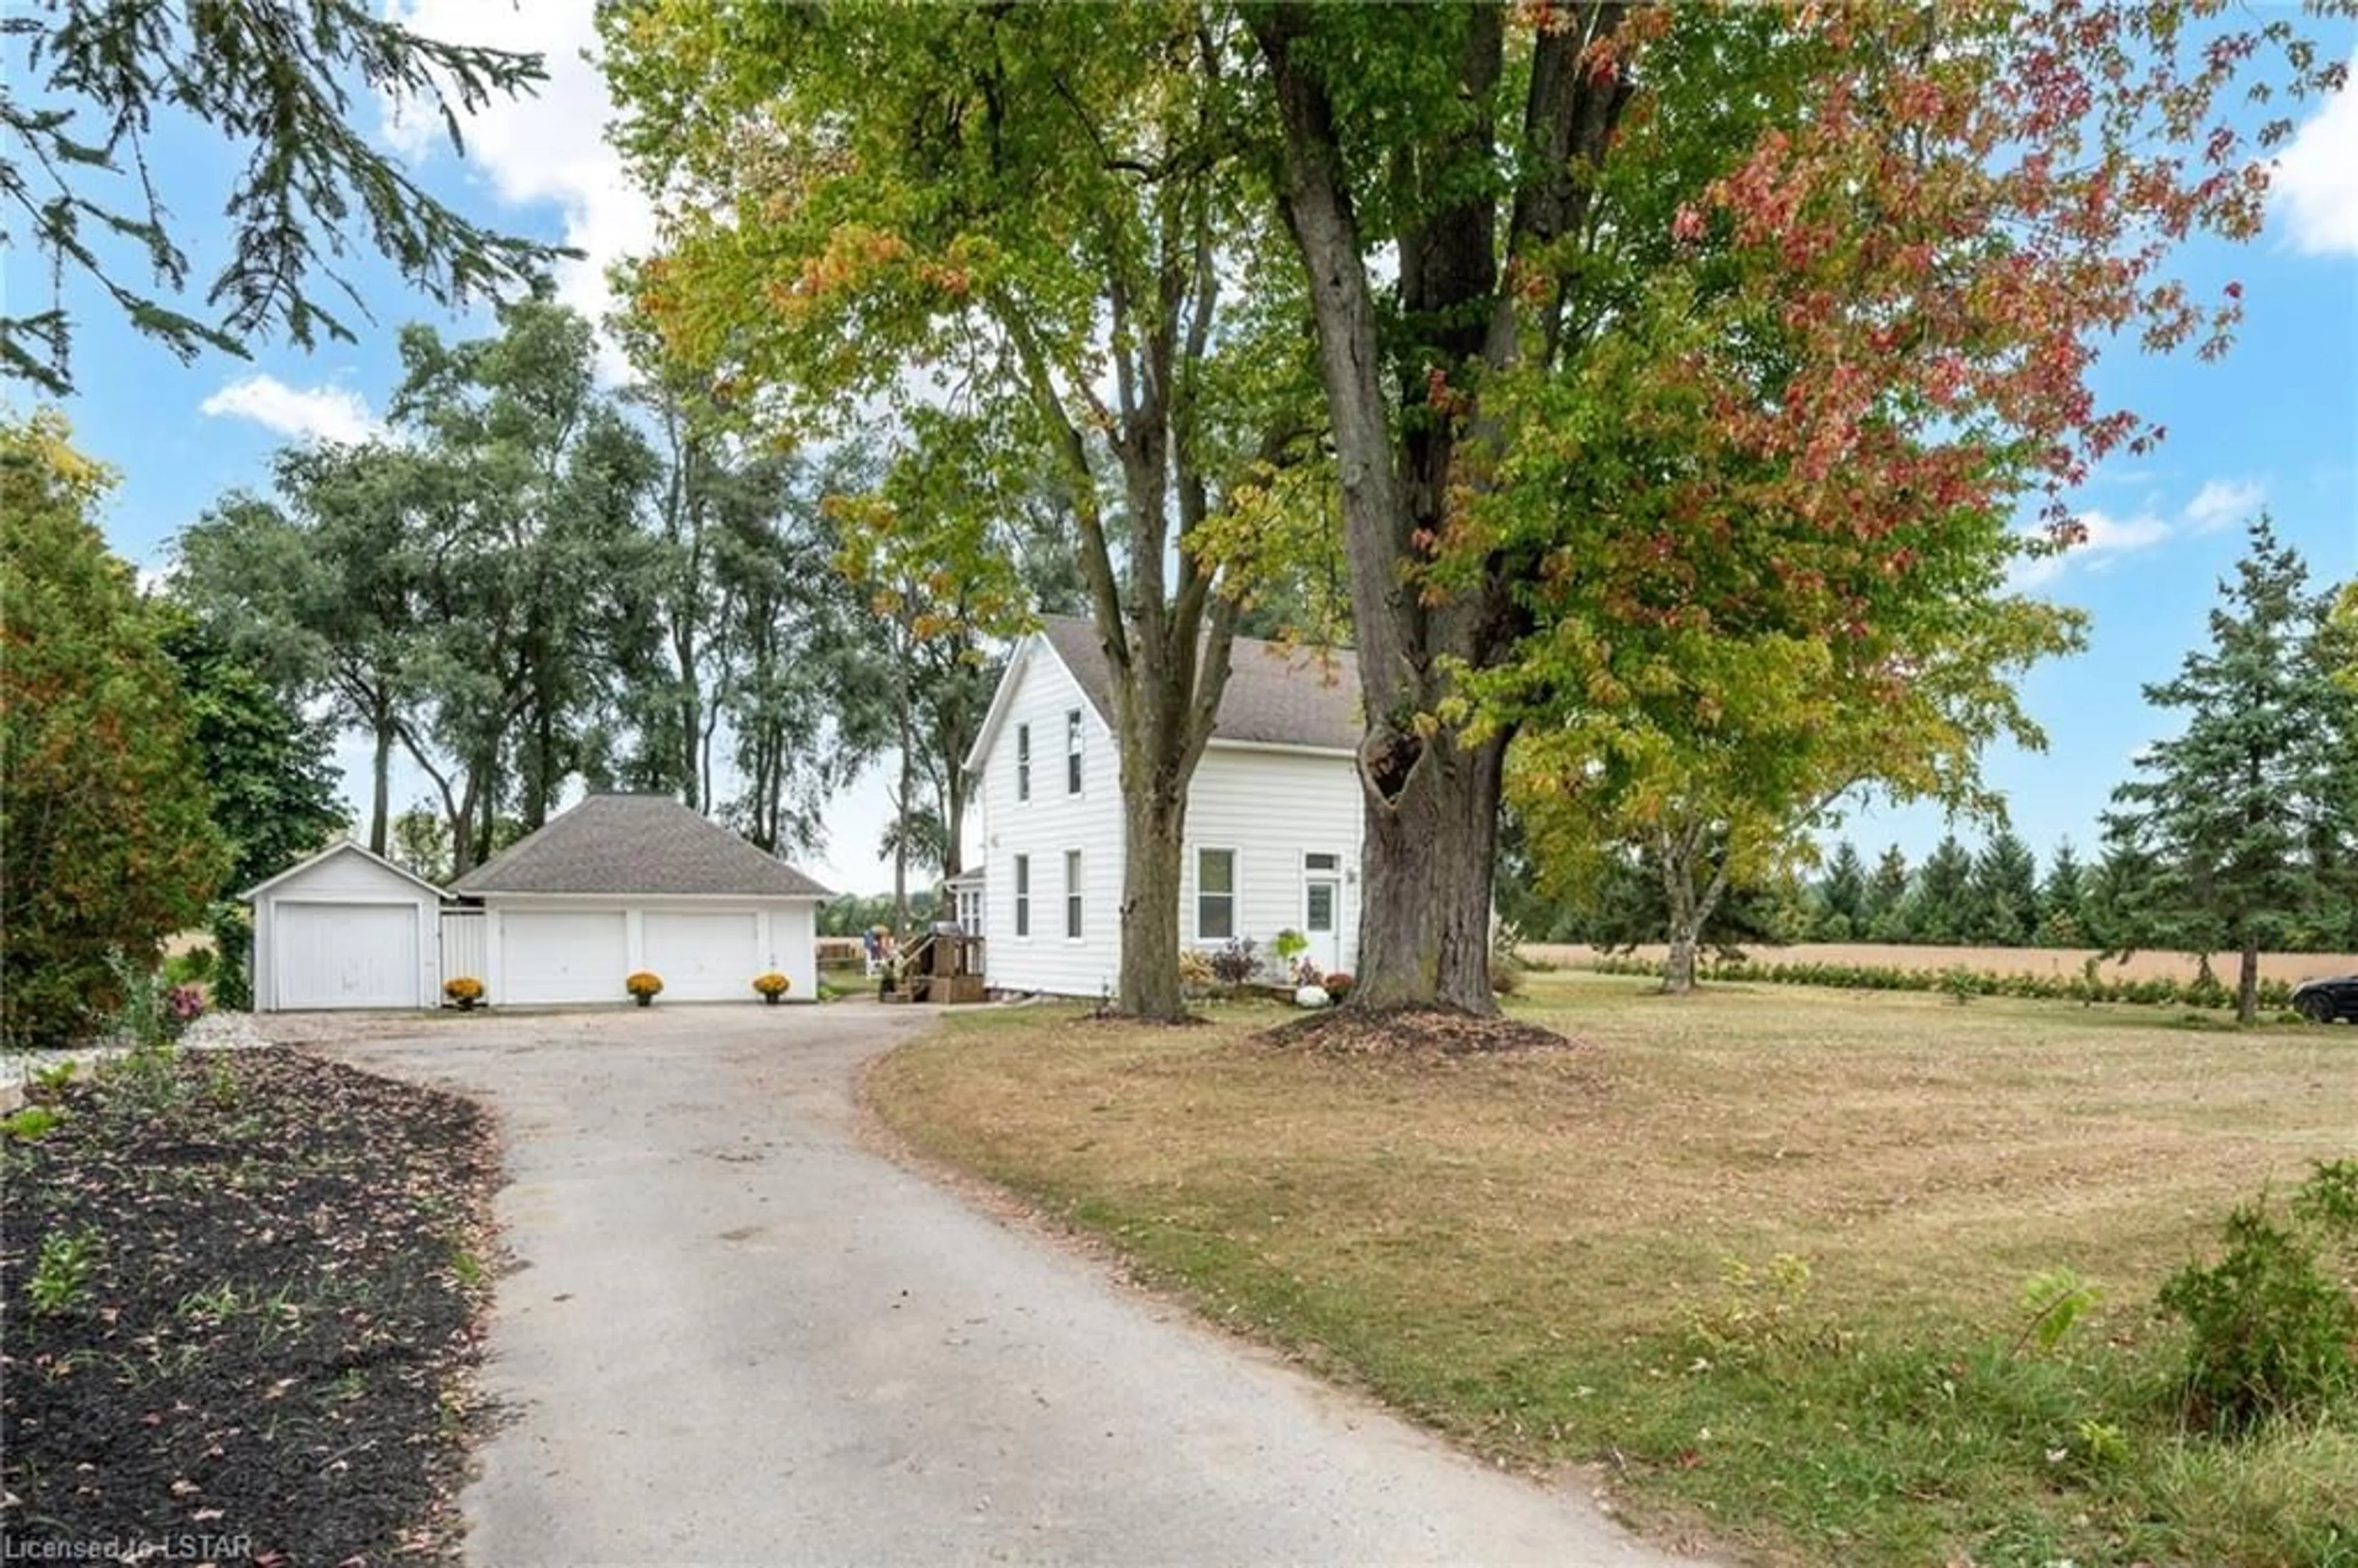 Street view for 9398 Glendon Dr, Mount Brydges Ontario N0L 1W0